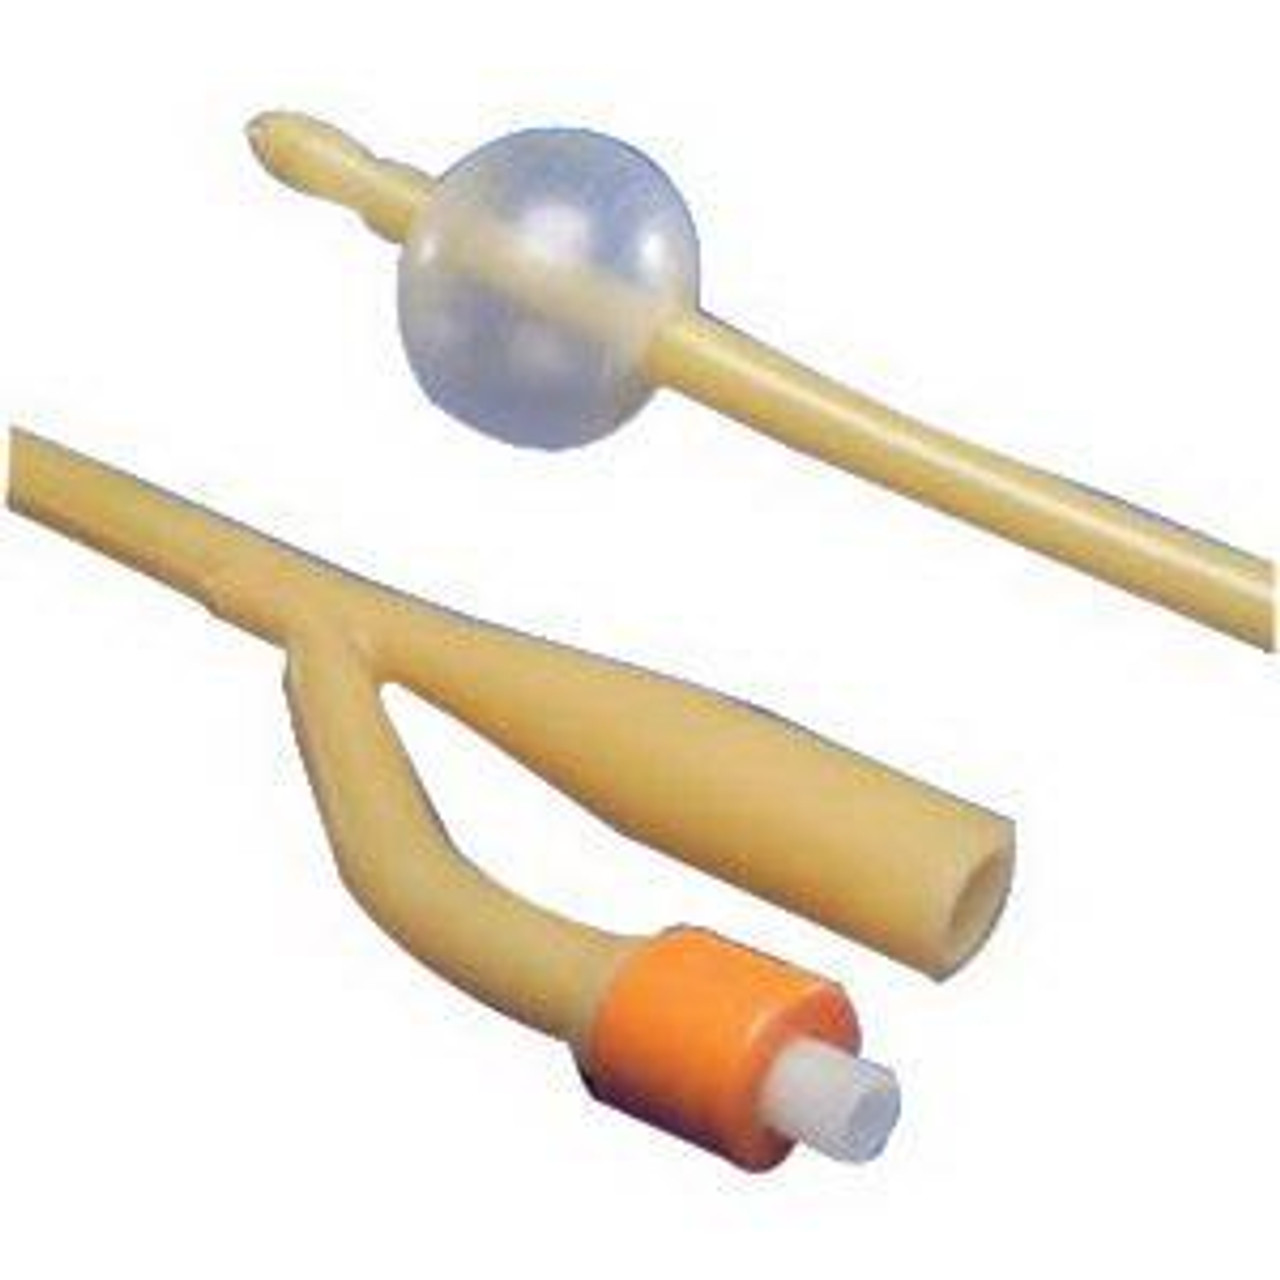 Kendall 1616 CTN/12 DOVER 2-WAY HYDROGEL COATED LATEX FOLEY CATHETER, SIZE 16FR 5CC (Kendall 1616)